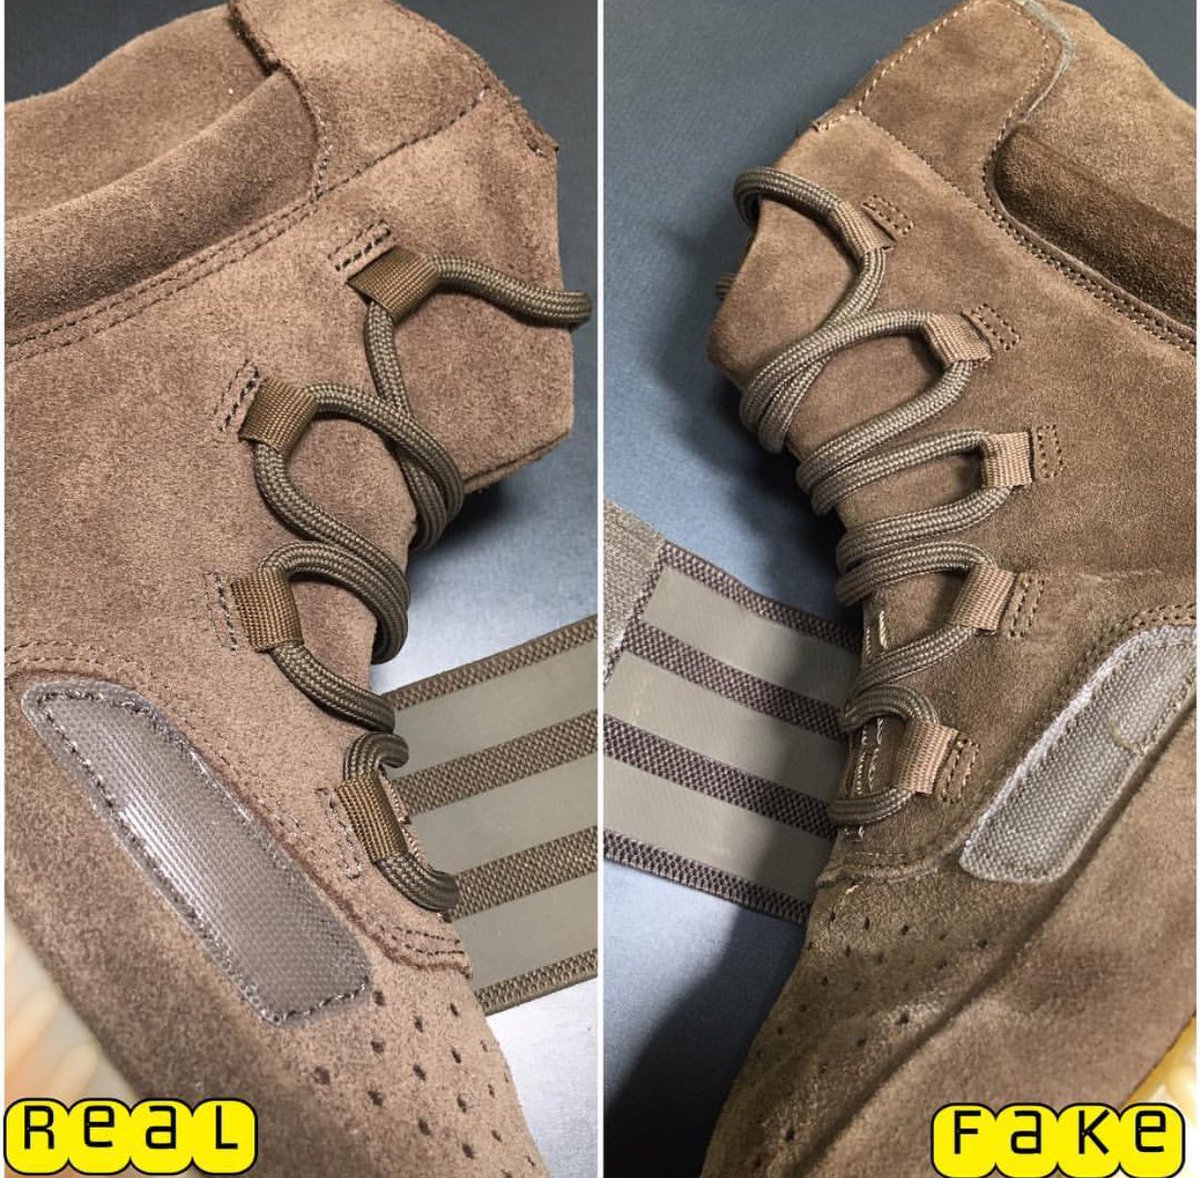 yeezy boost 750 fake